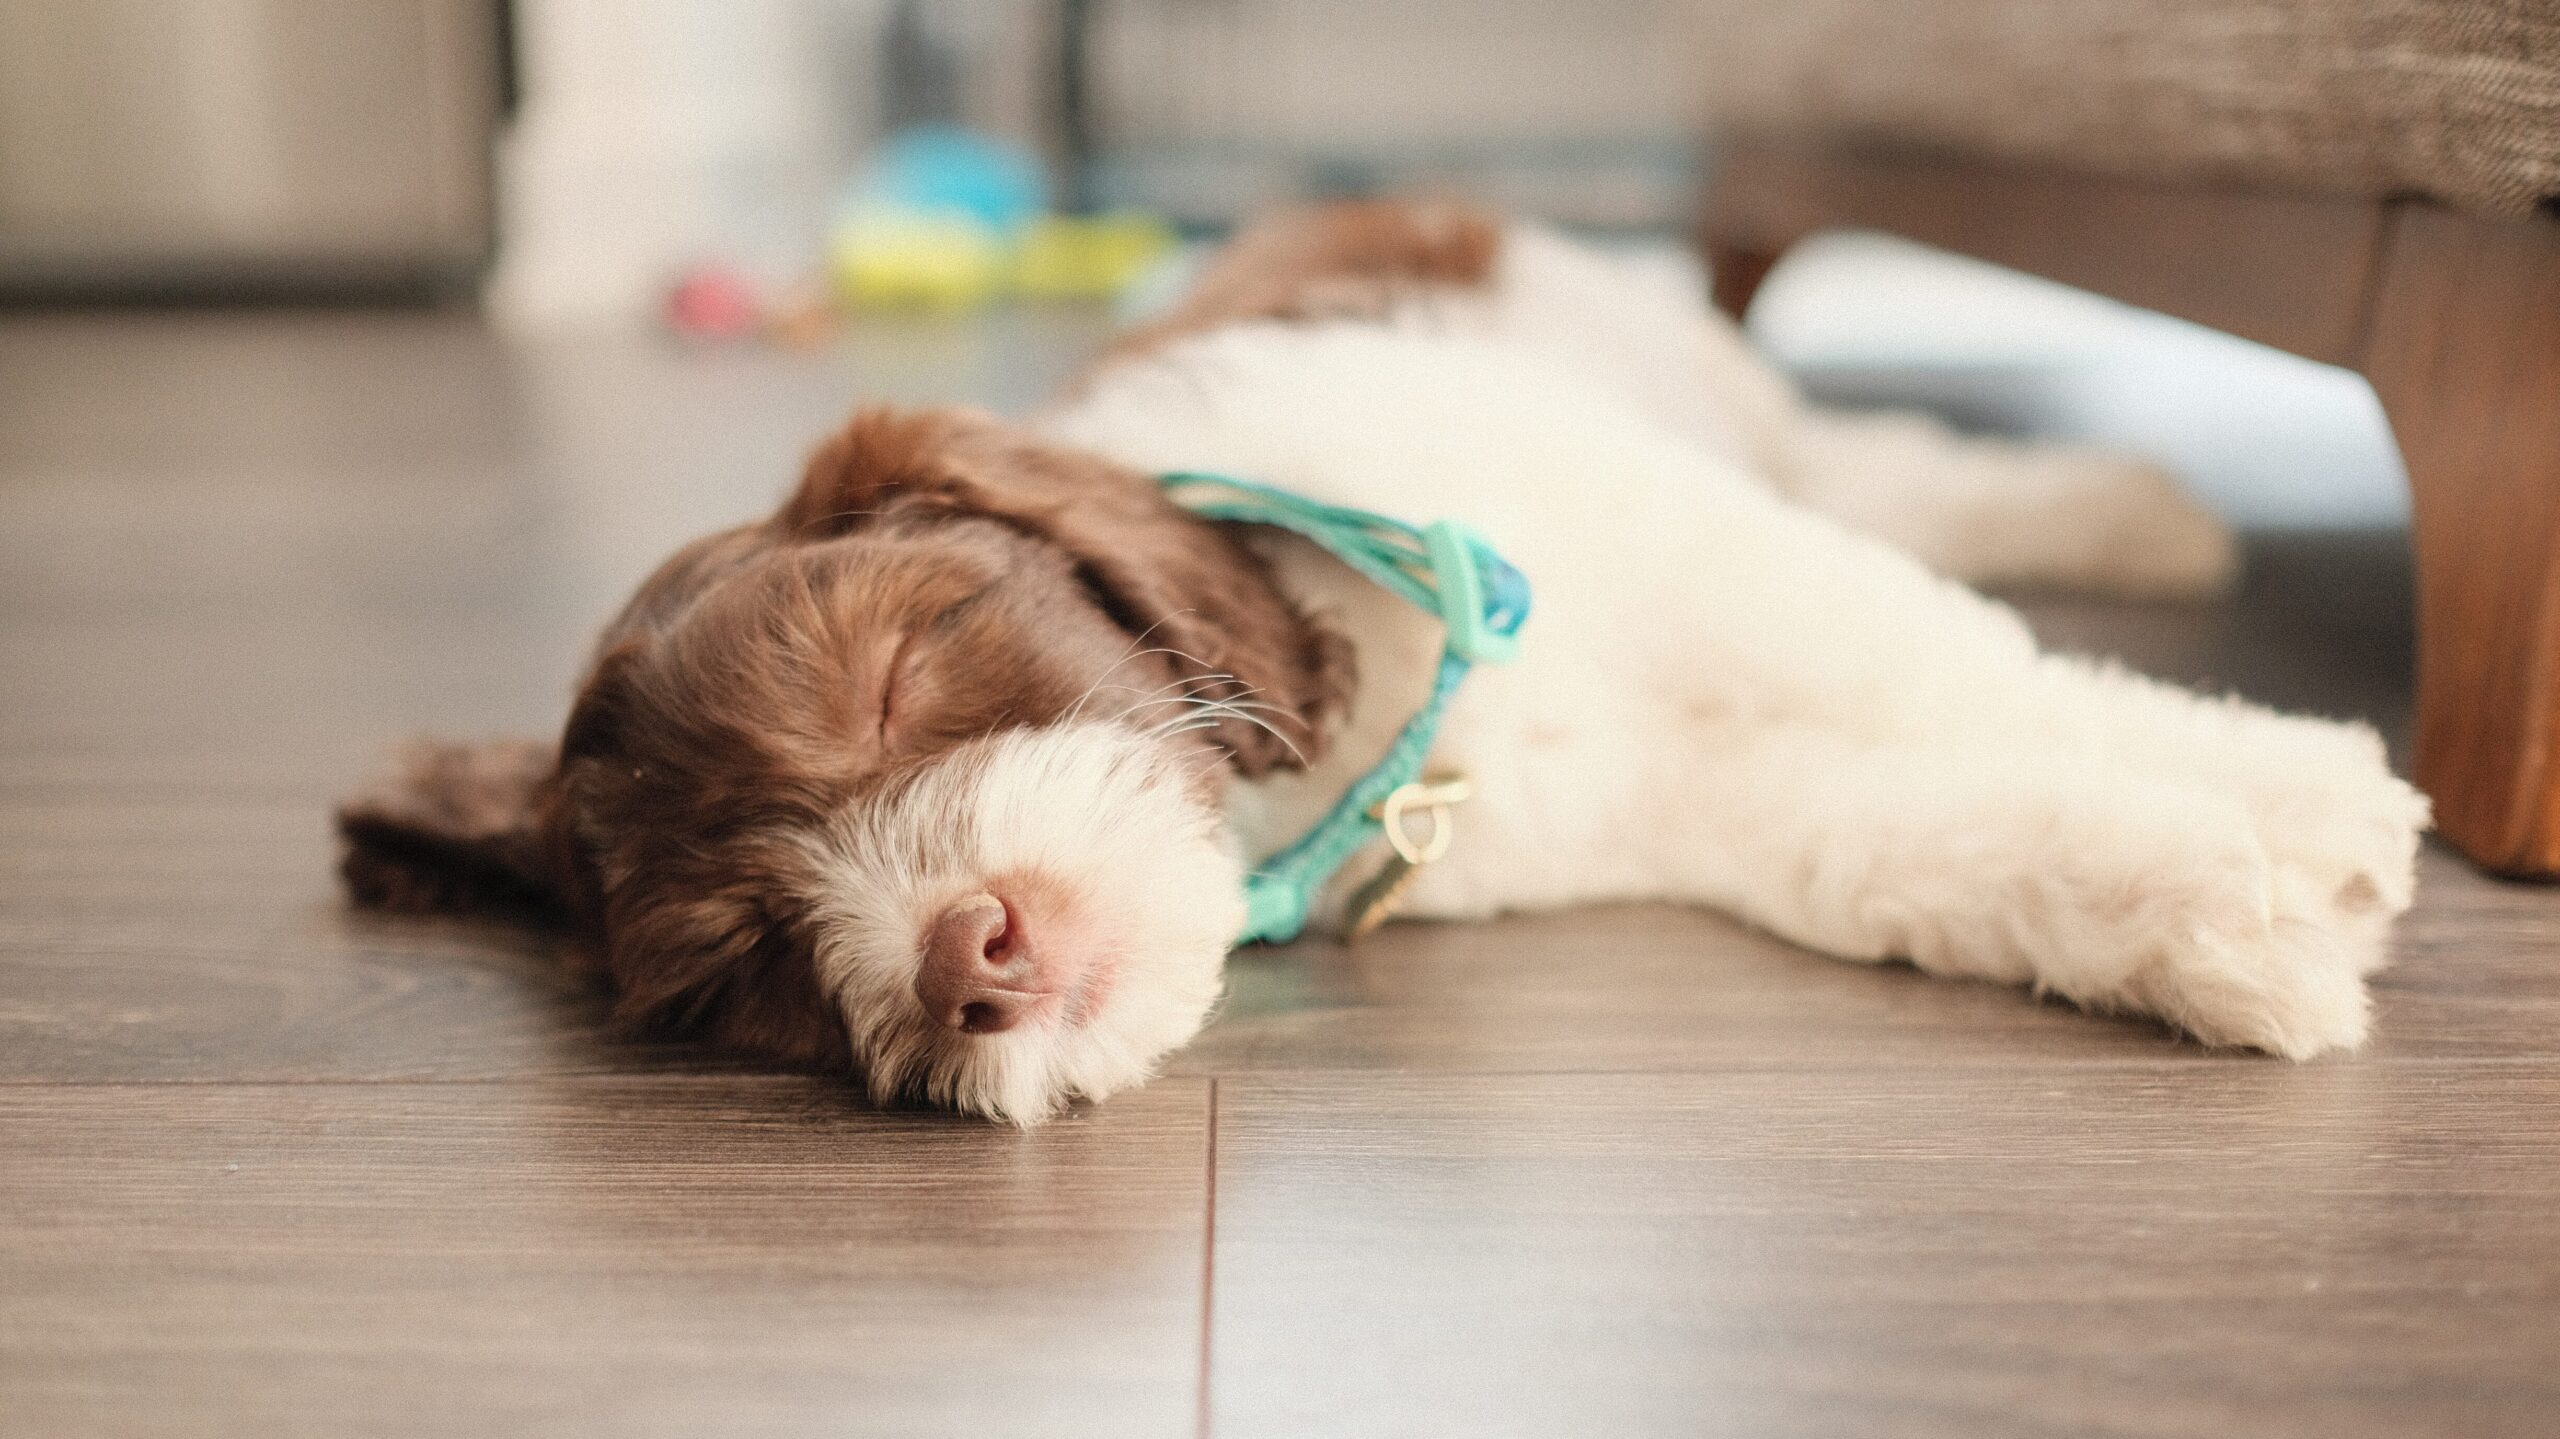 A sleeping labradoodle puppy on a wooden floor